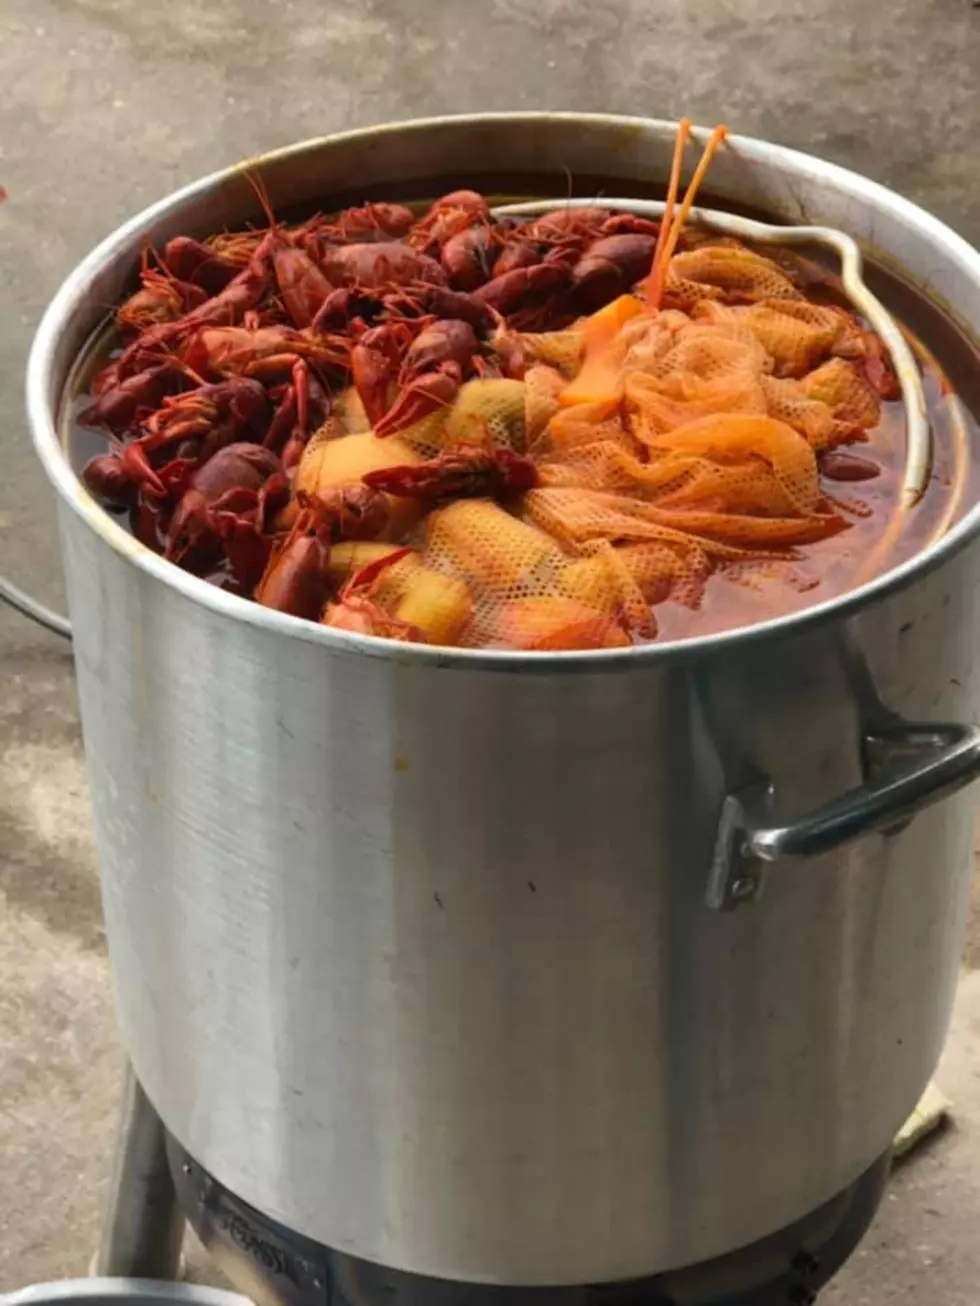 Win Our Good Friday Crawfish Boil — Enter Here